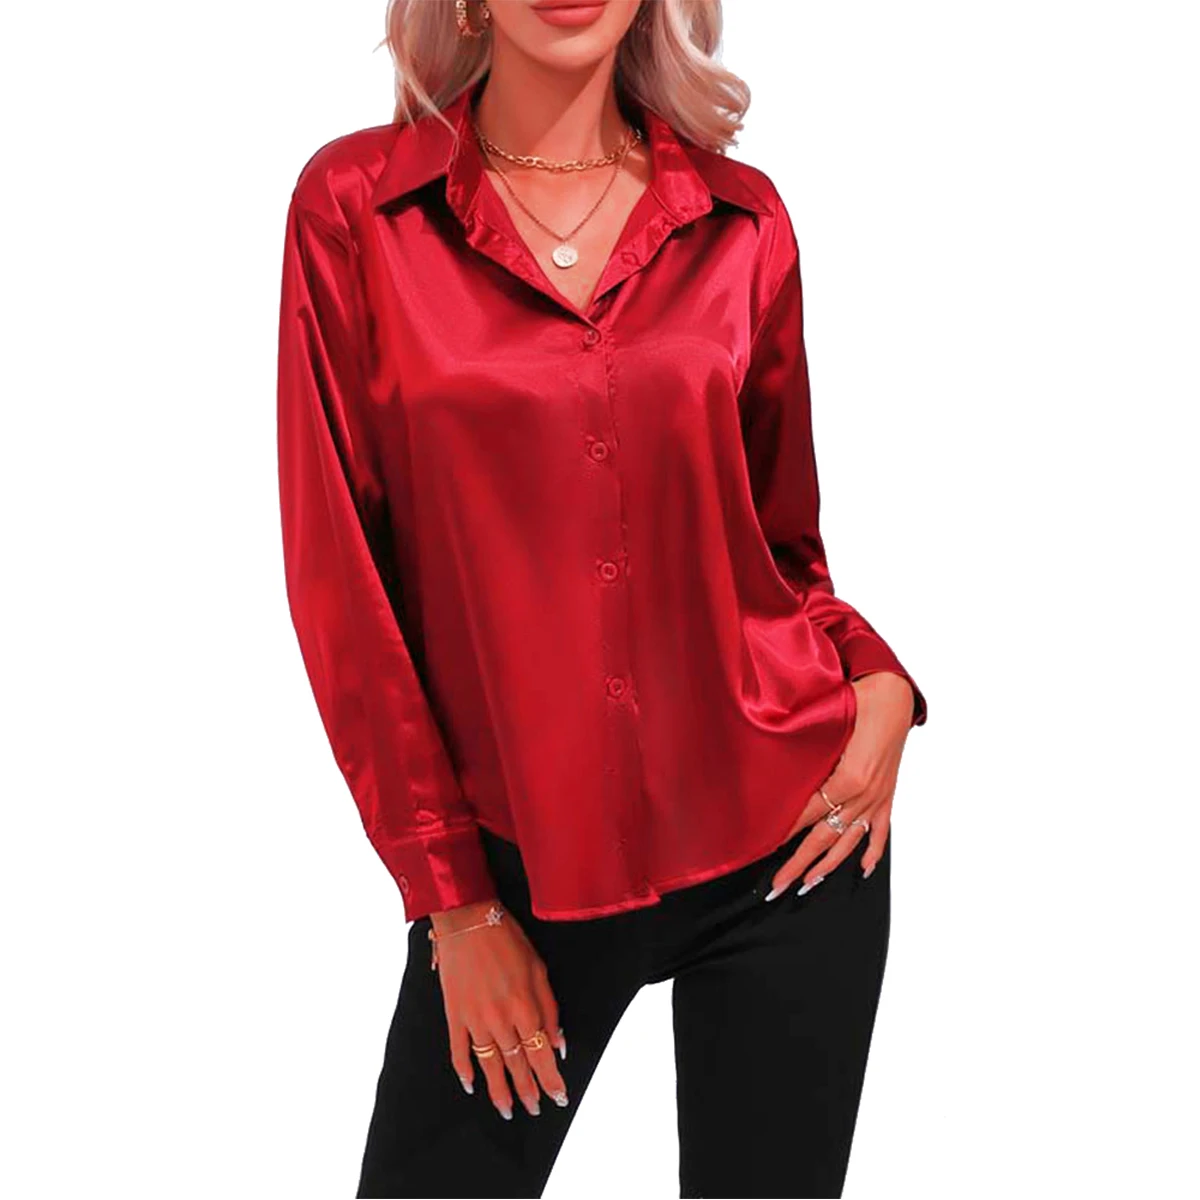 Oversize Women Shirts Silk Solid Plain Red White Black Green Blue Pink Yellow Purple Blouses Long Sleeve Tops Barry Wang black jeans for men cotton stretchy skinny jeans high quality hip hop solid color slim oversize denim pencil pants streetwear